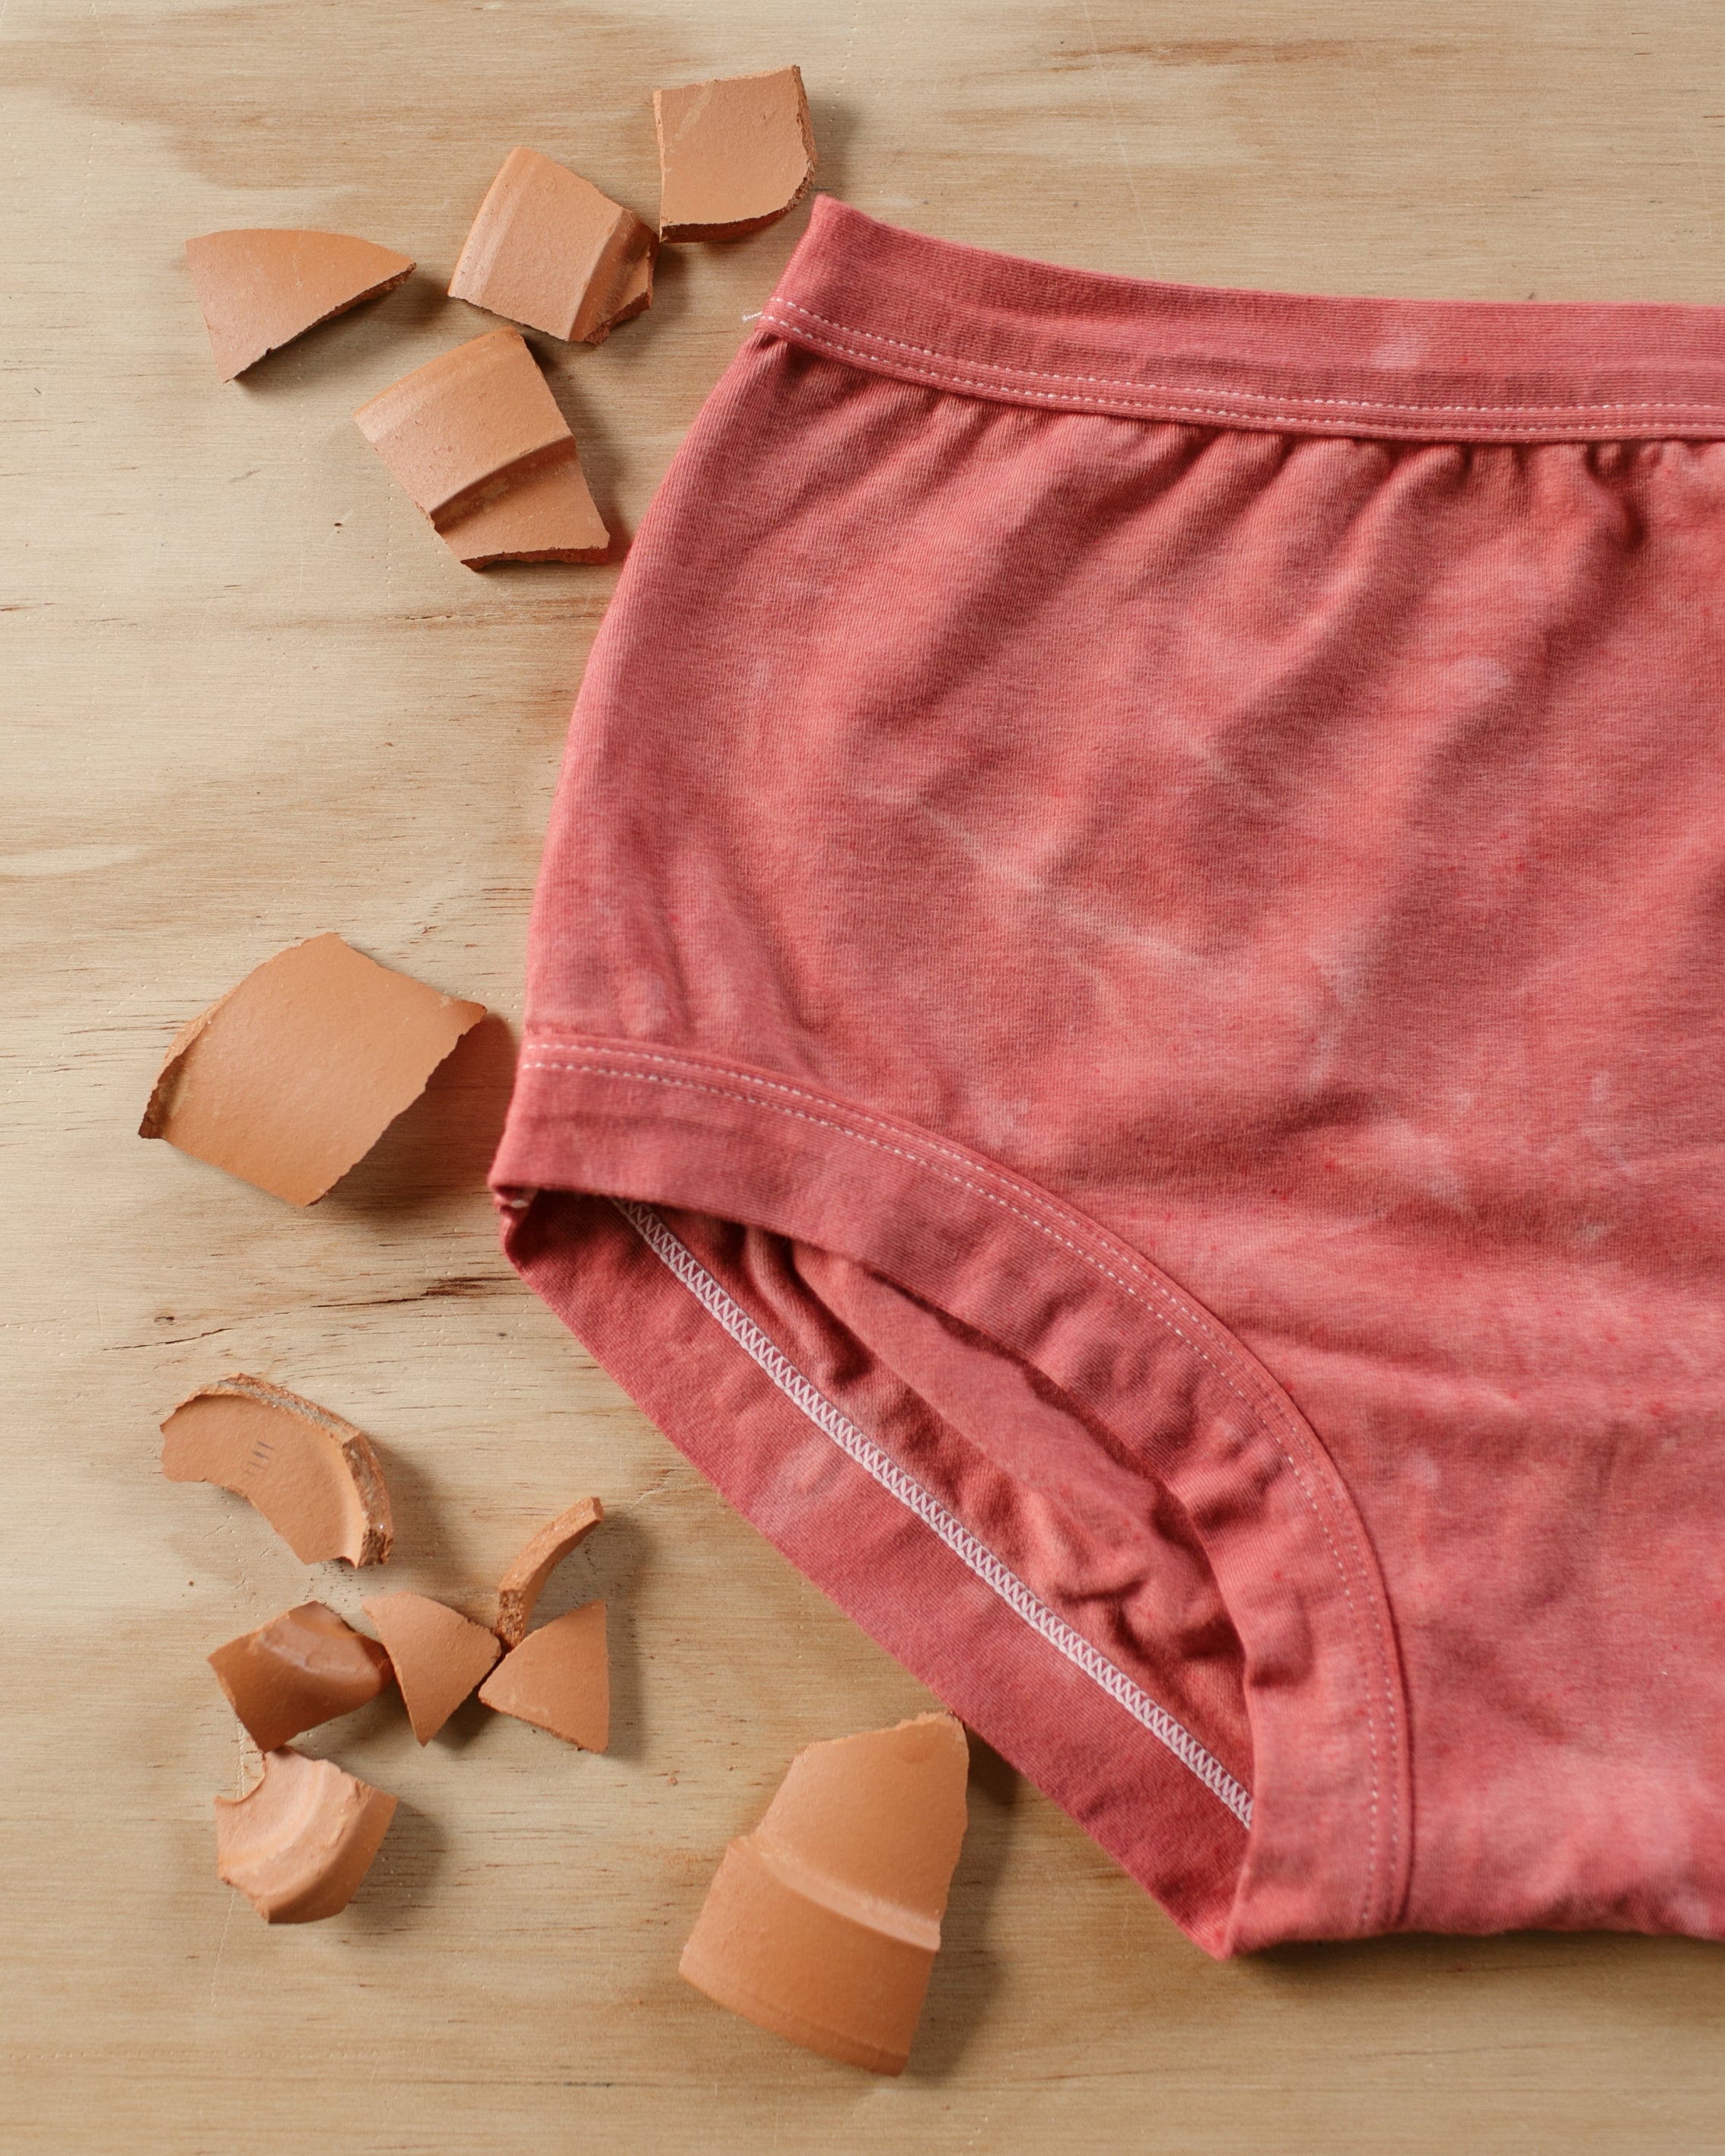 Flat lay of Thunderpants organic cotton Original underwear in hand dyed Terracotta color with broken terracotta around.